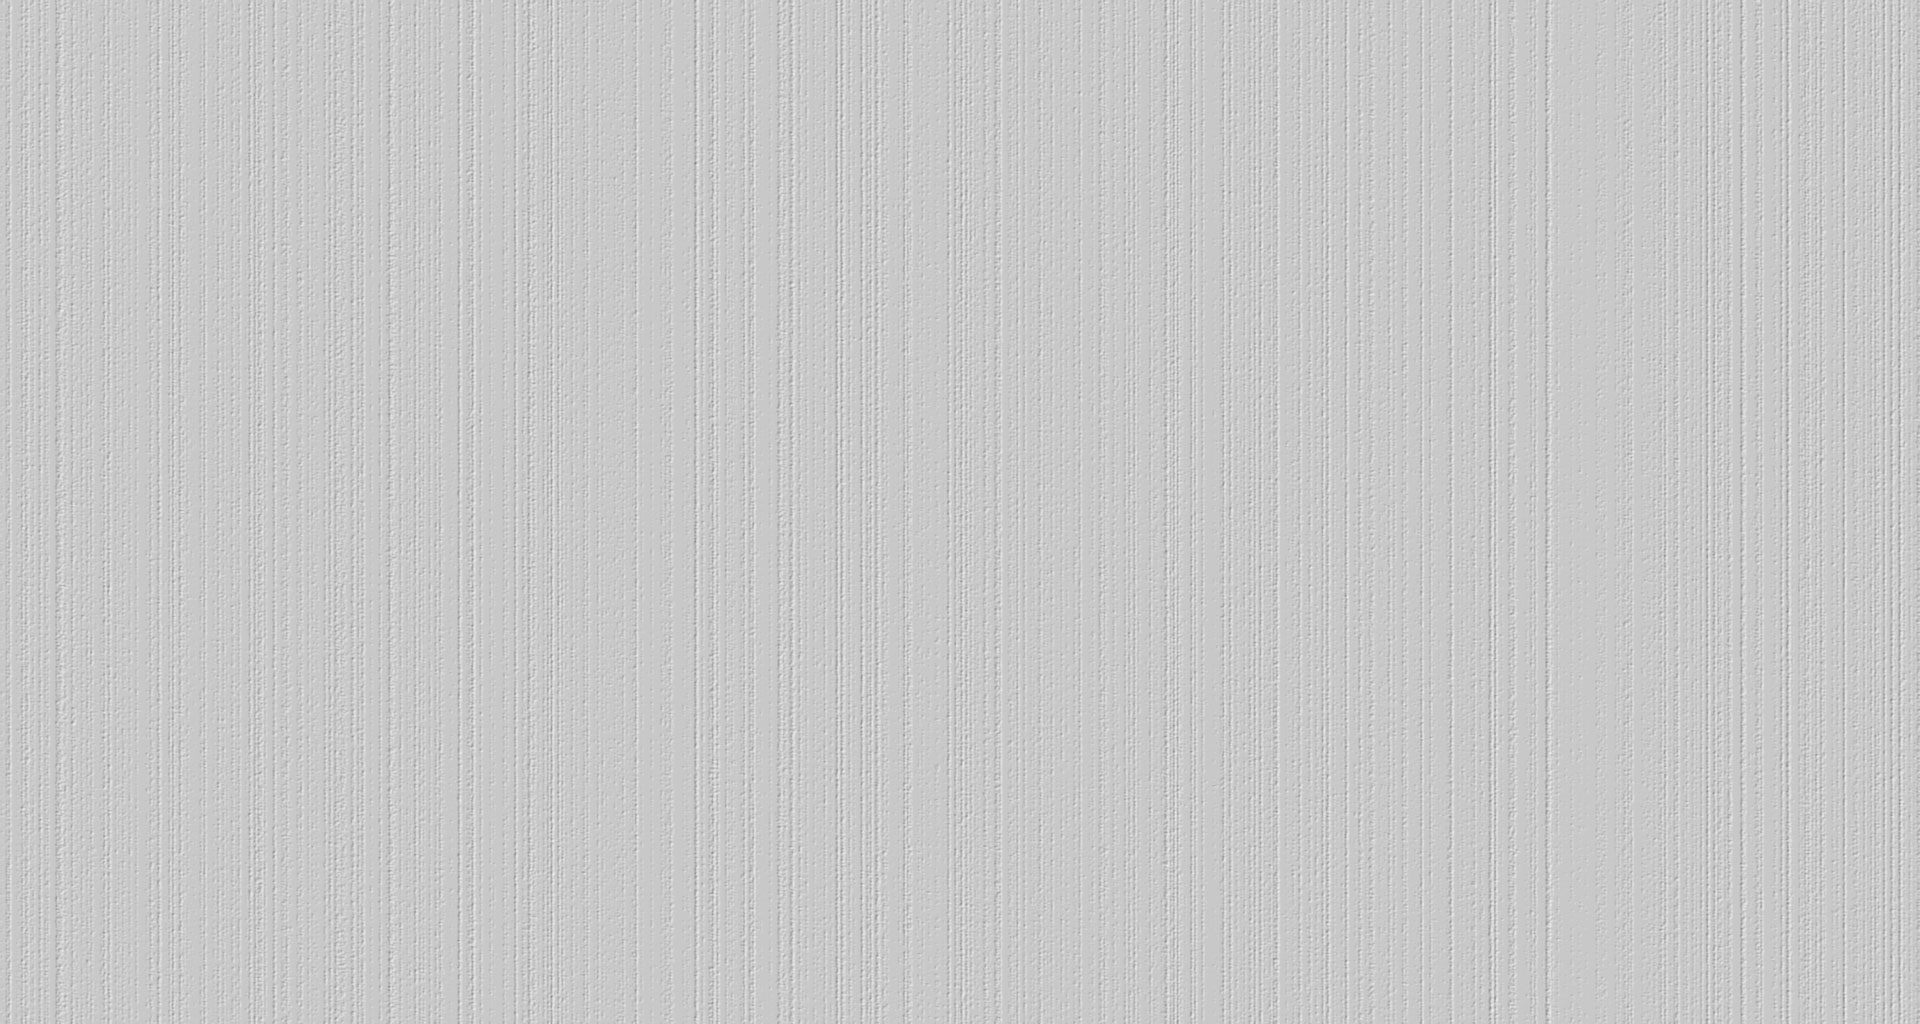 Light Gray Wooden Texture Background hd Images